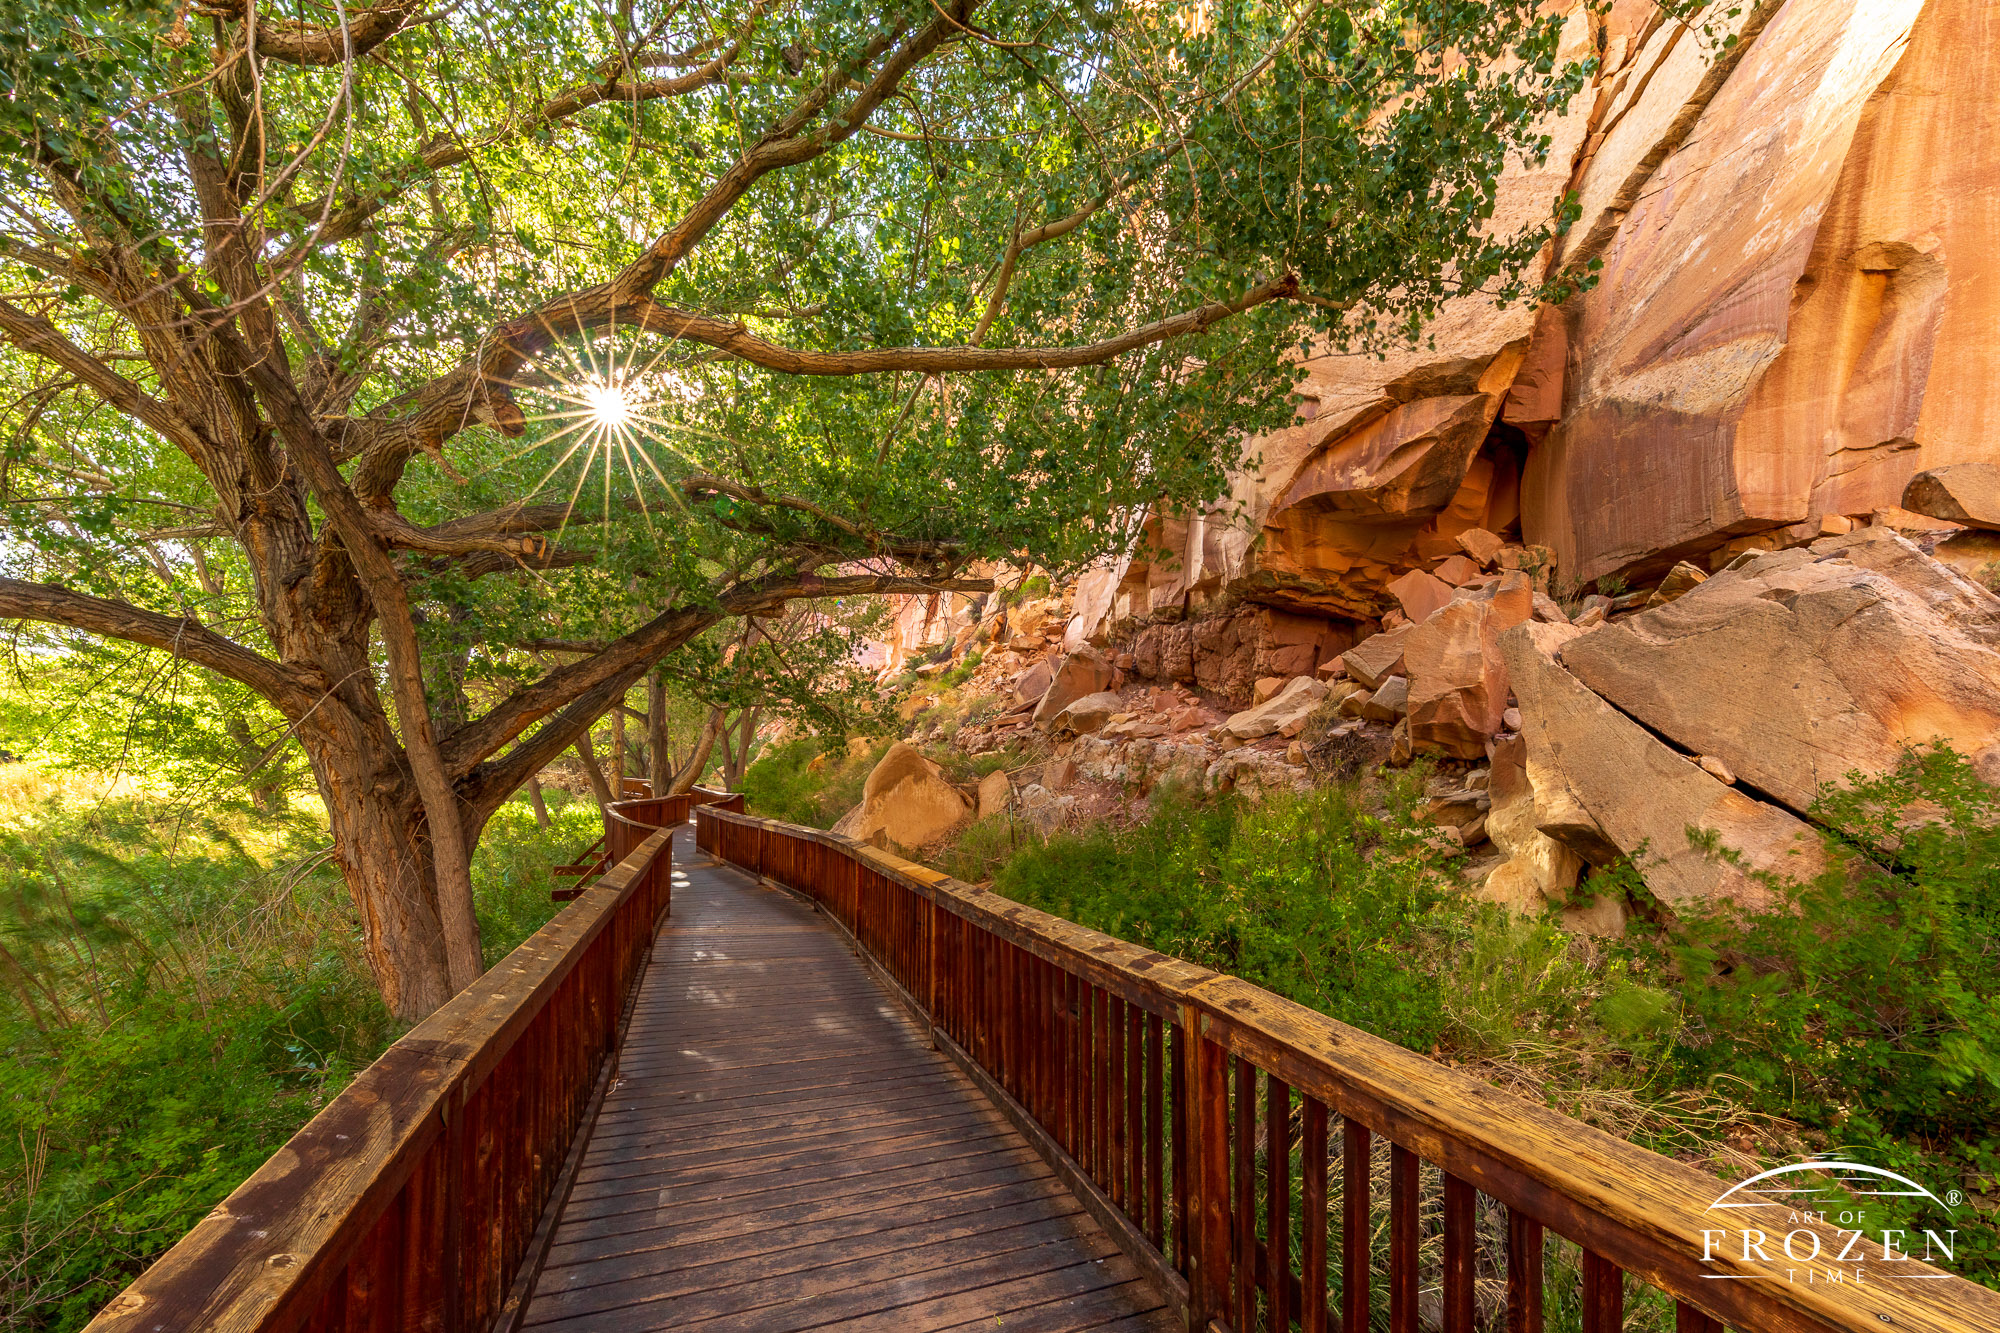 Boardwalk leads visitors under filtered sunlight by Freemont Culture Petroglyphs who occupied today’s Capitol Reef National Park